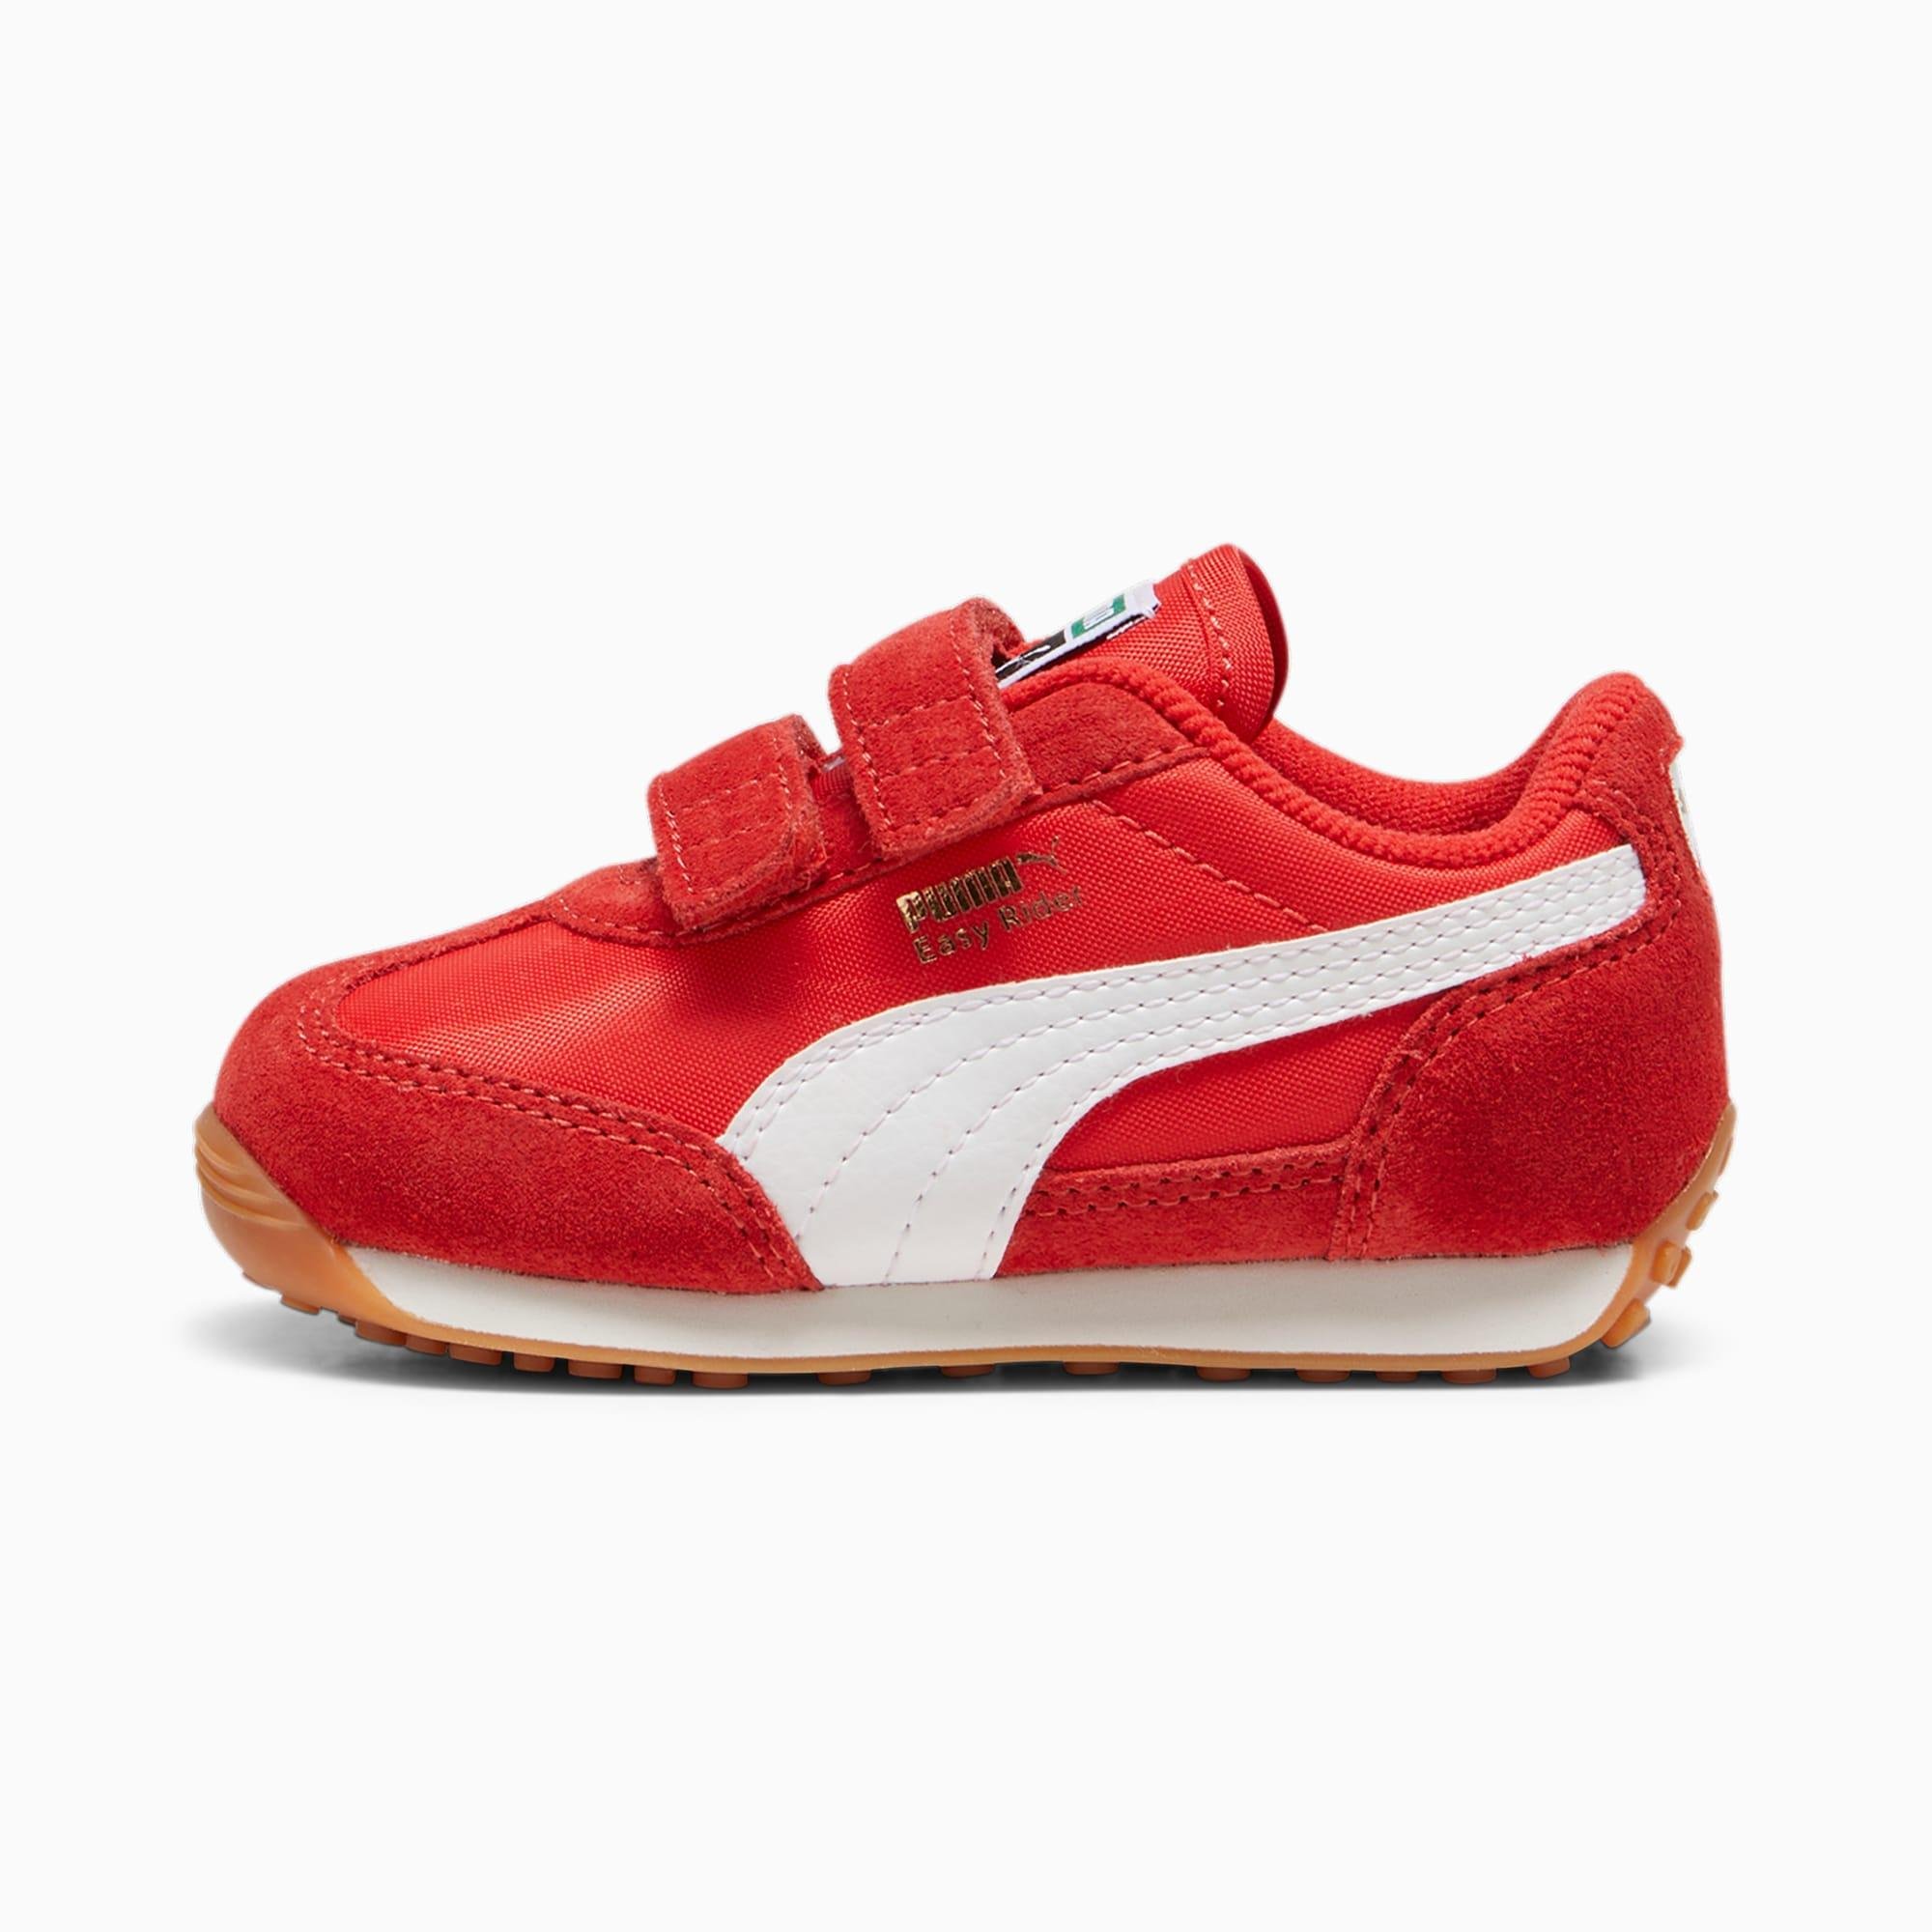 Easy Rider Vintage Toddlers' Sneakers by PUMA